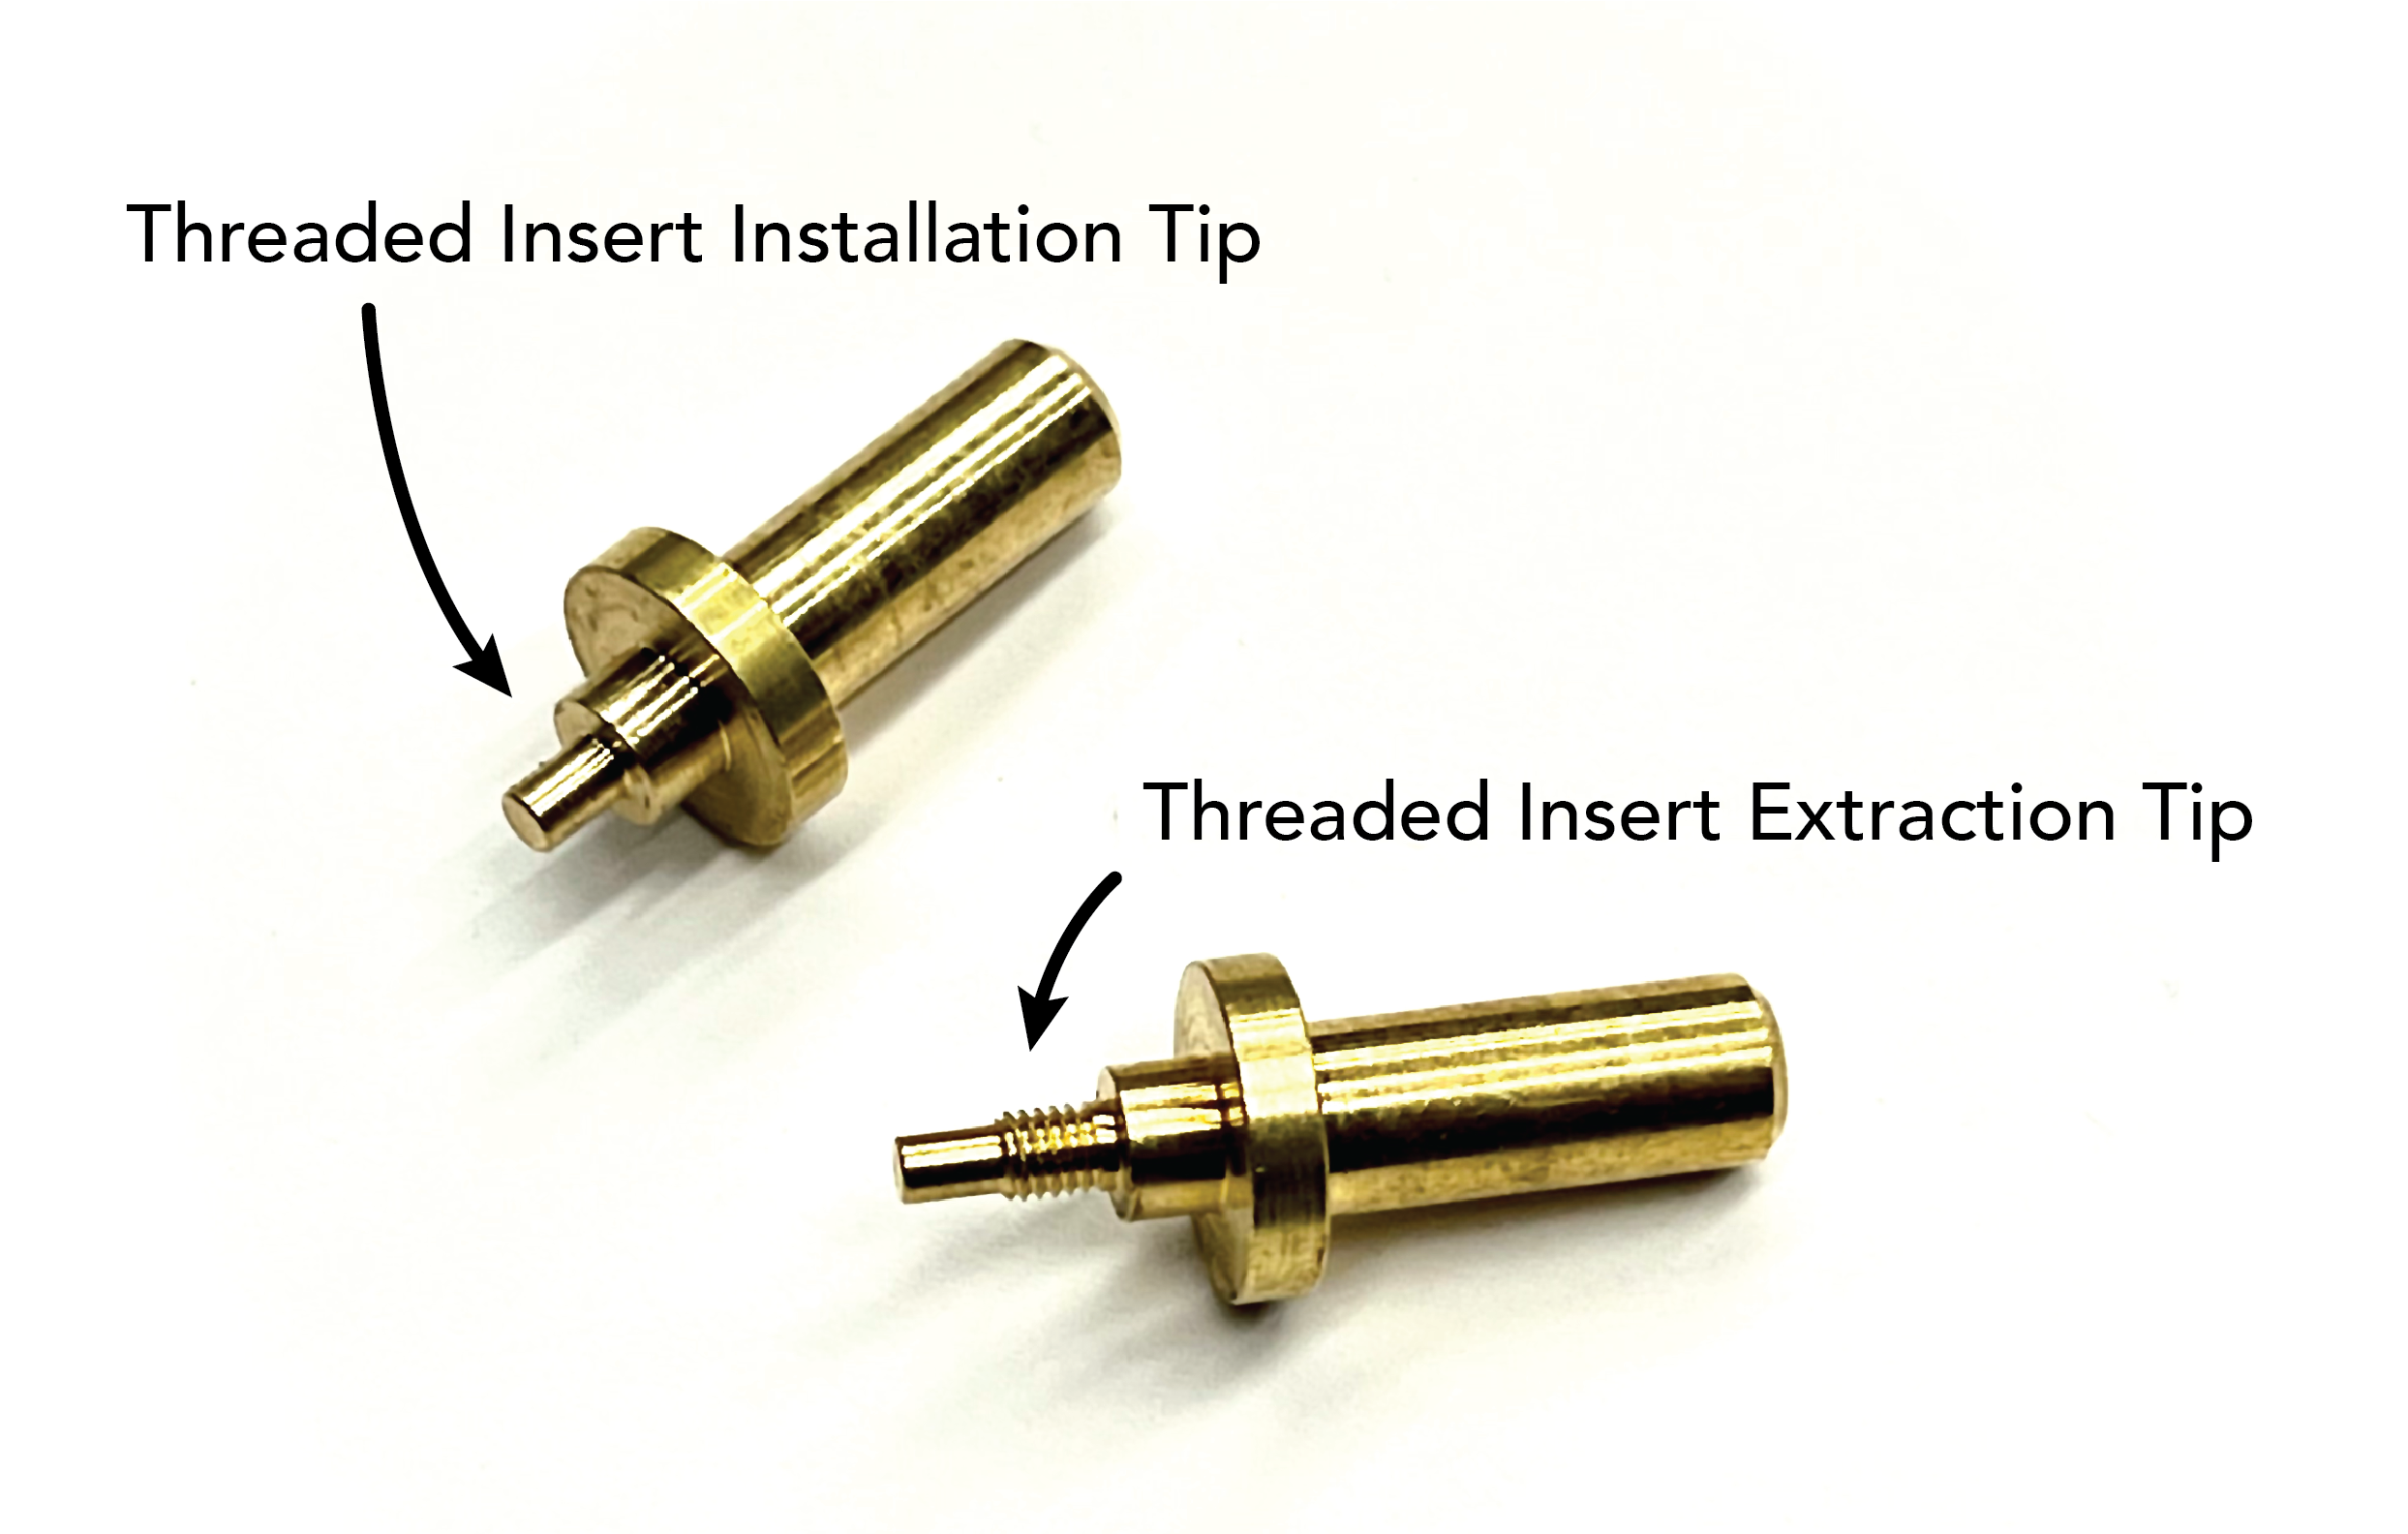 Threaded Insert Installation and Extraction Tip